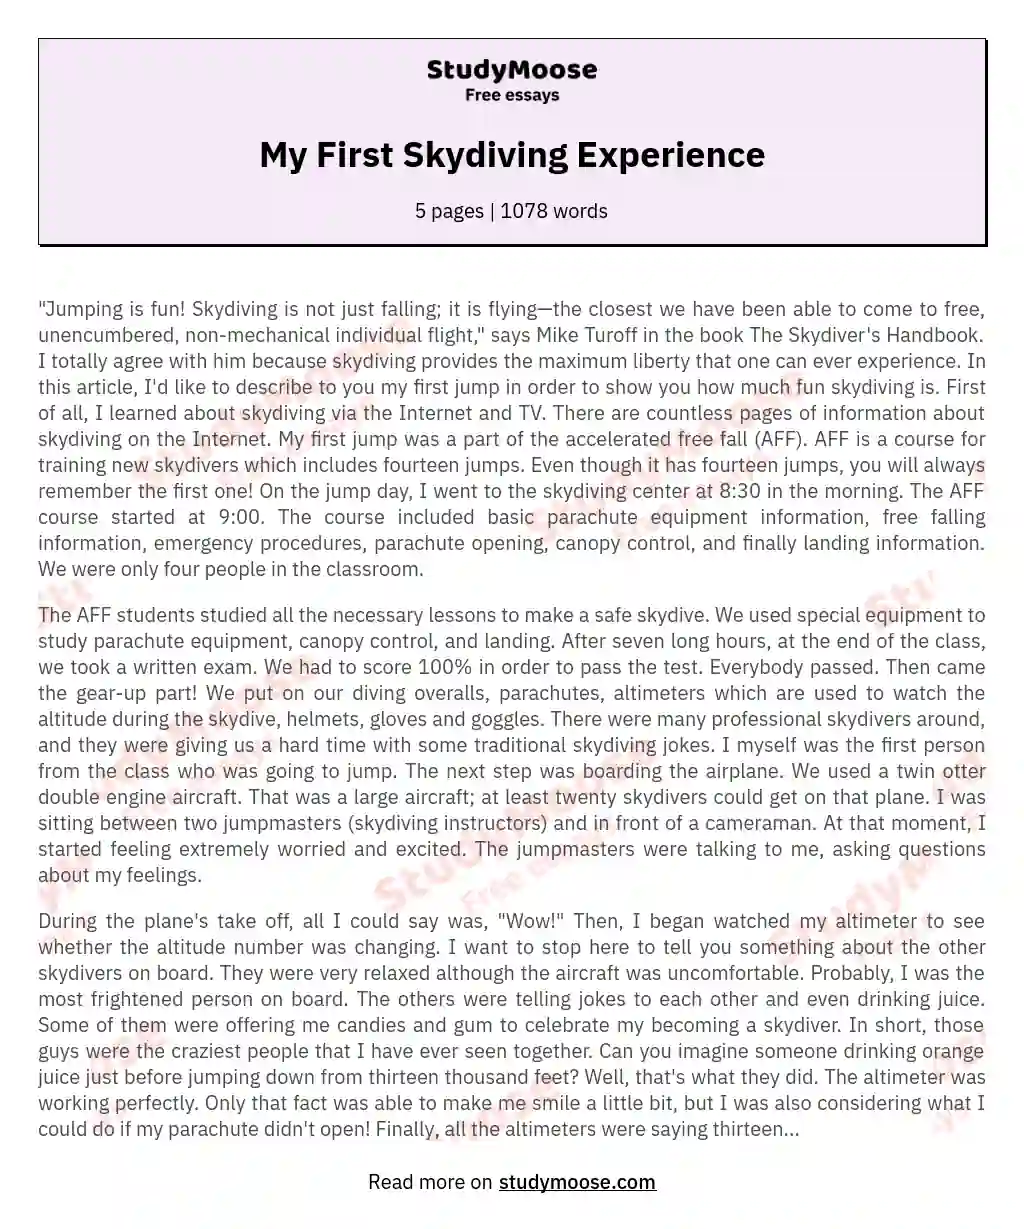 My First Skydiving Experience essay